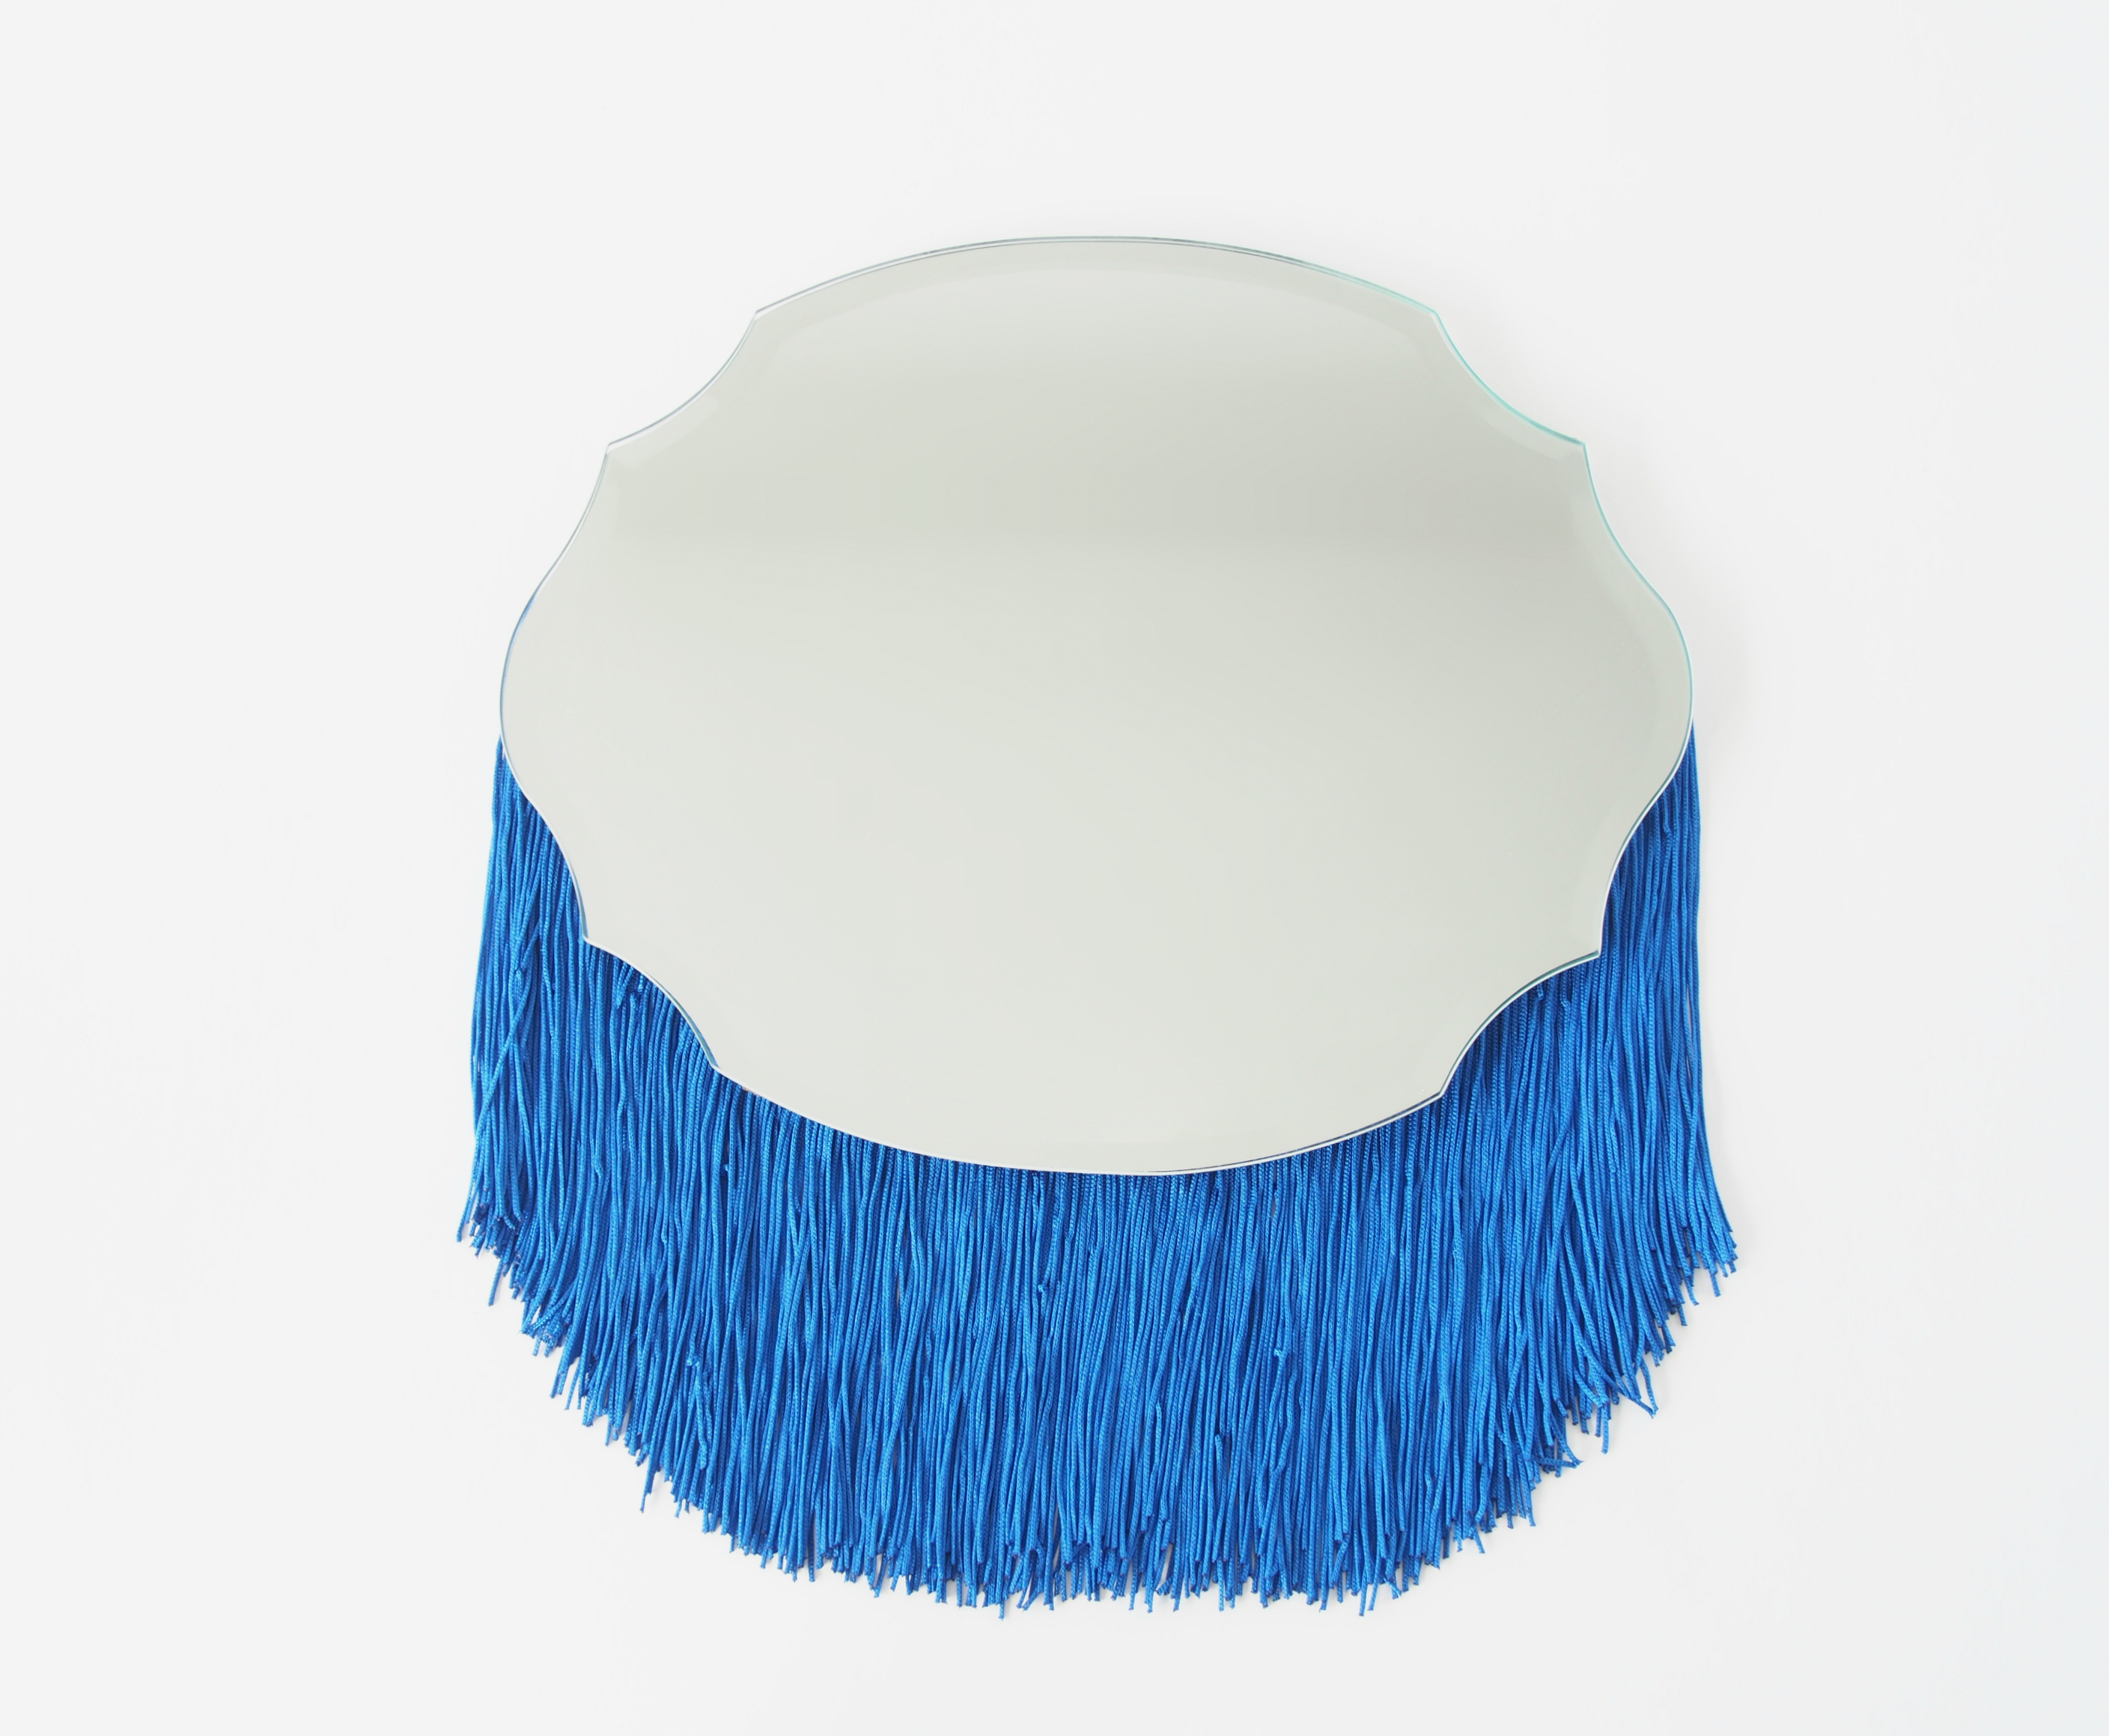 DIY quirky shaped mirror with bright blue fringe